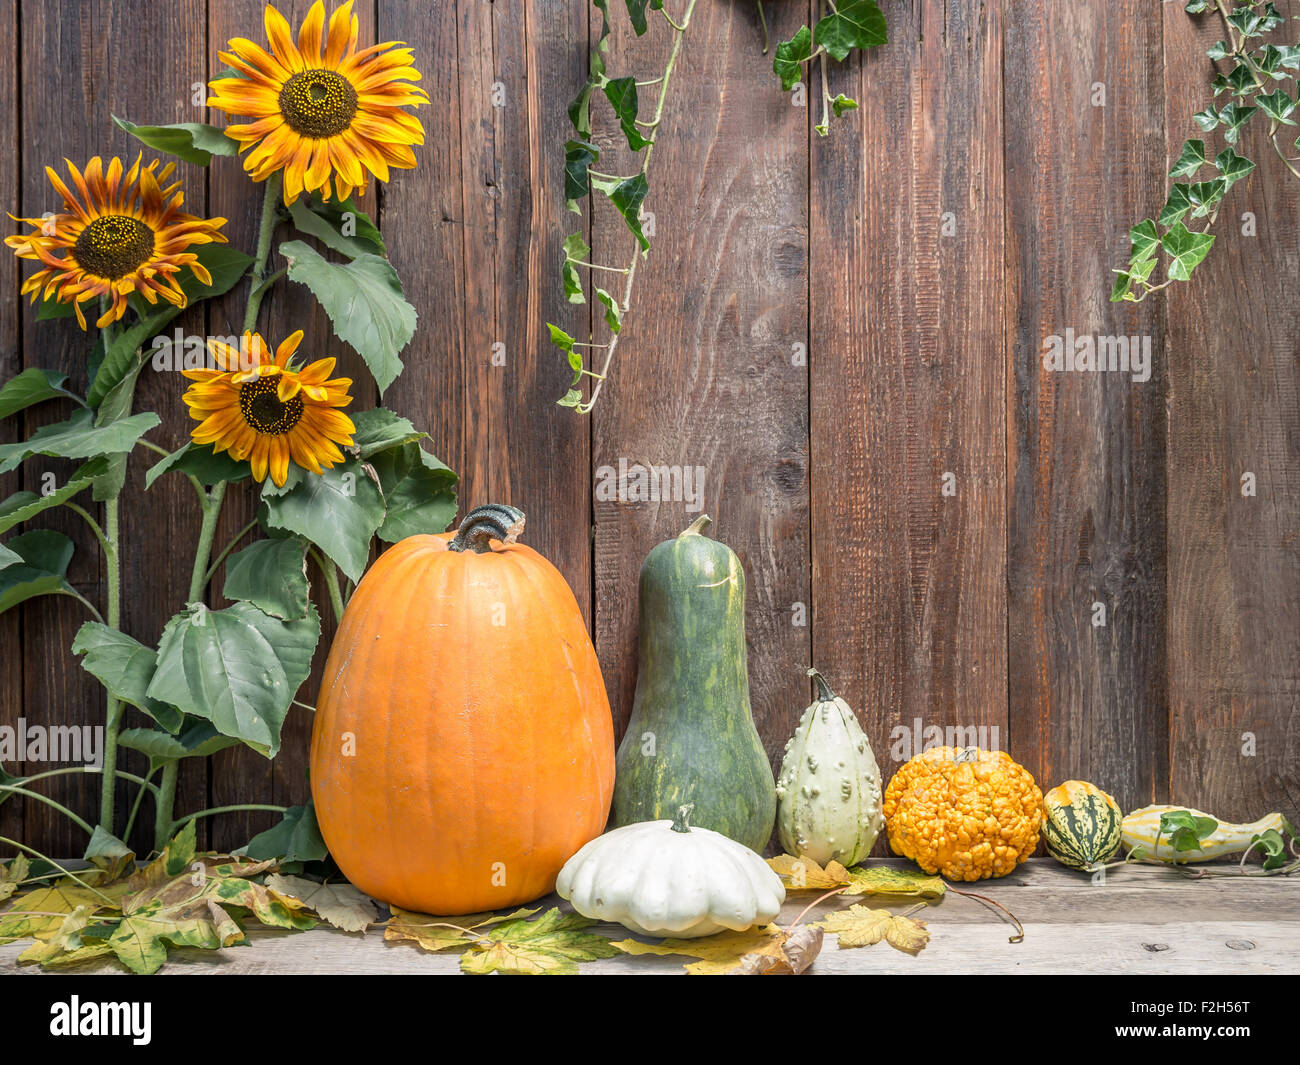 Composition of pumpkins, zucchini,summer squashes, against rustic wooden plank wall Stock Photo